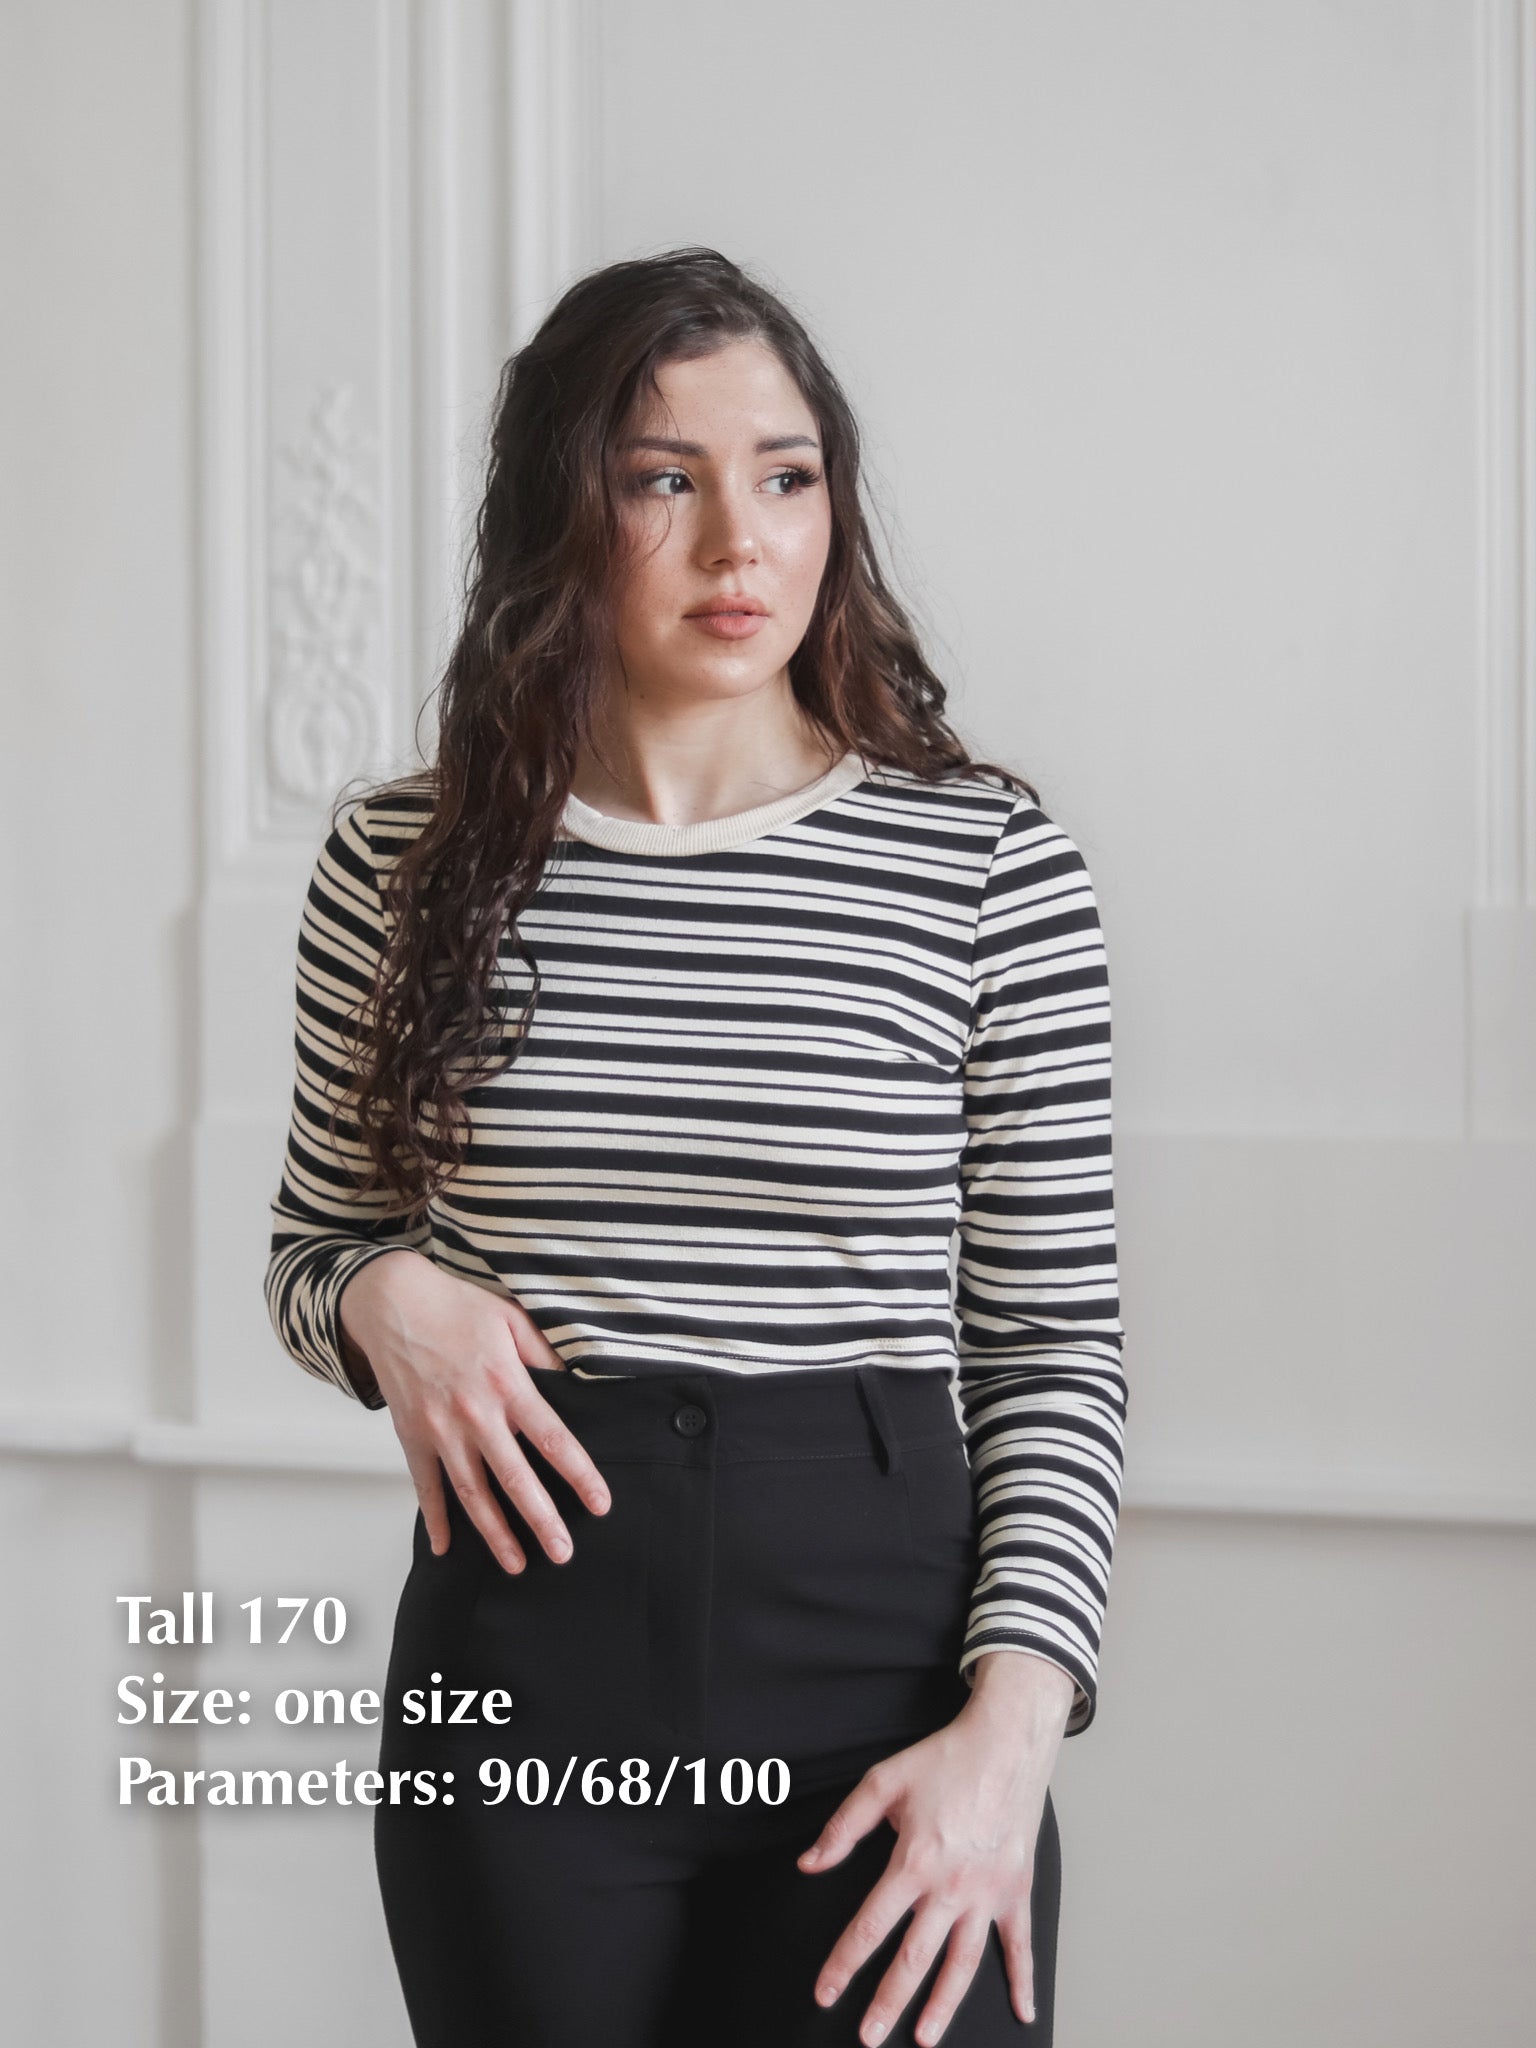 Striped round neck crop-top with sleeves